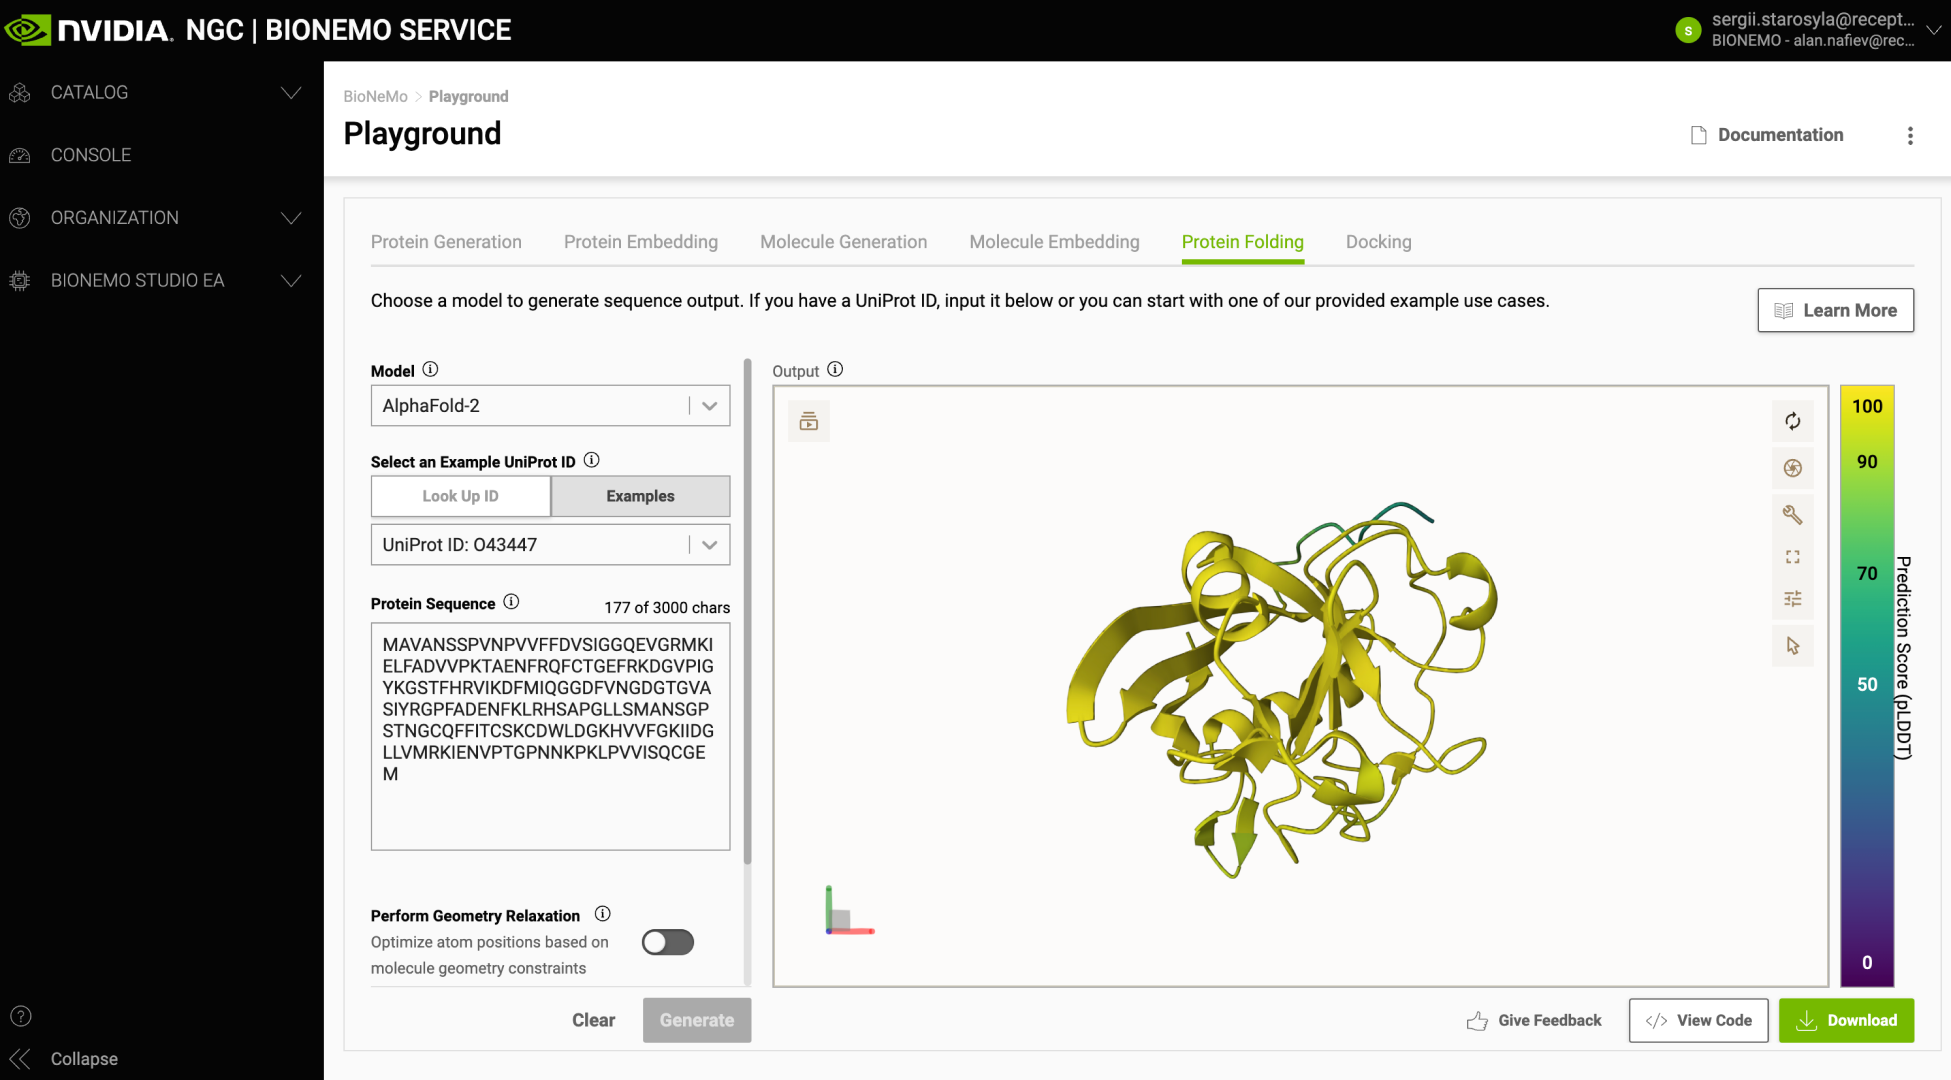 Screenshot of a protein folding model in NVIDIA BioNeMo Playground 